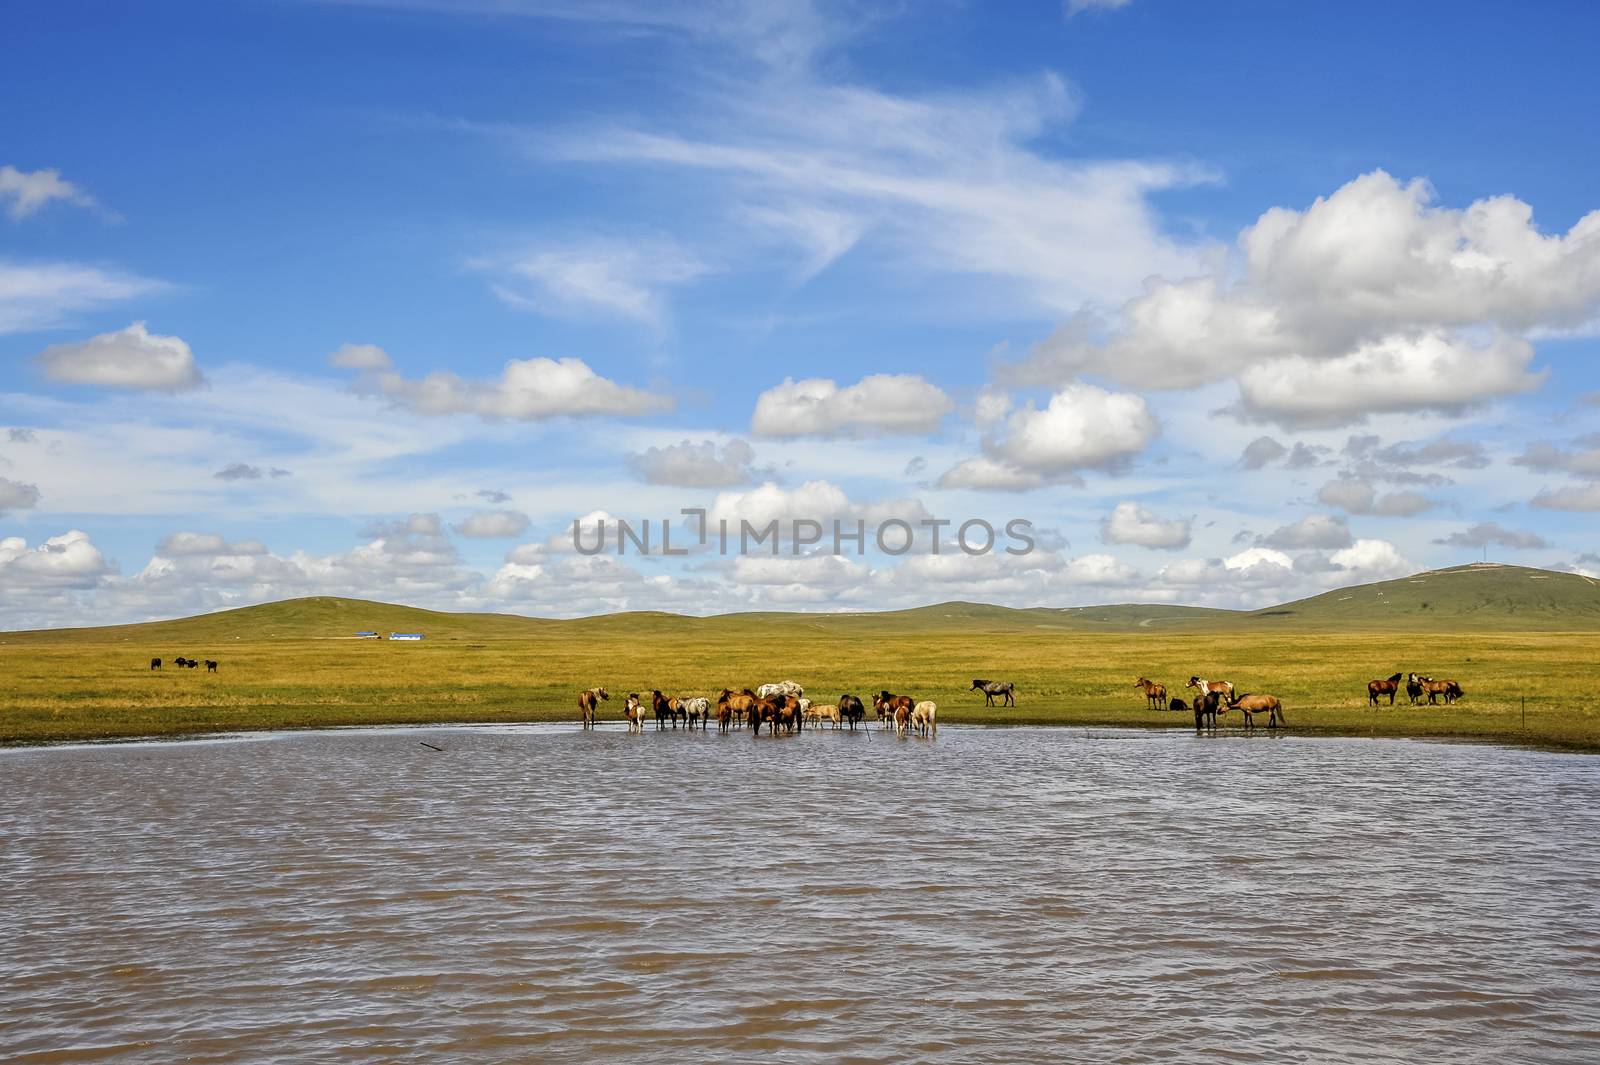 The horses at the nature beautiful Hulun prairie in Inner Mongolia, China.